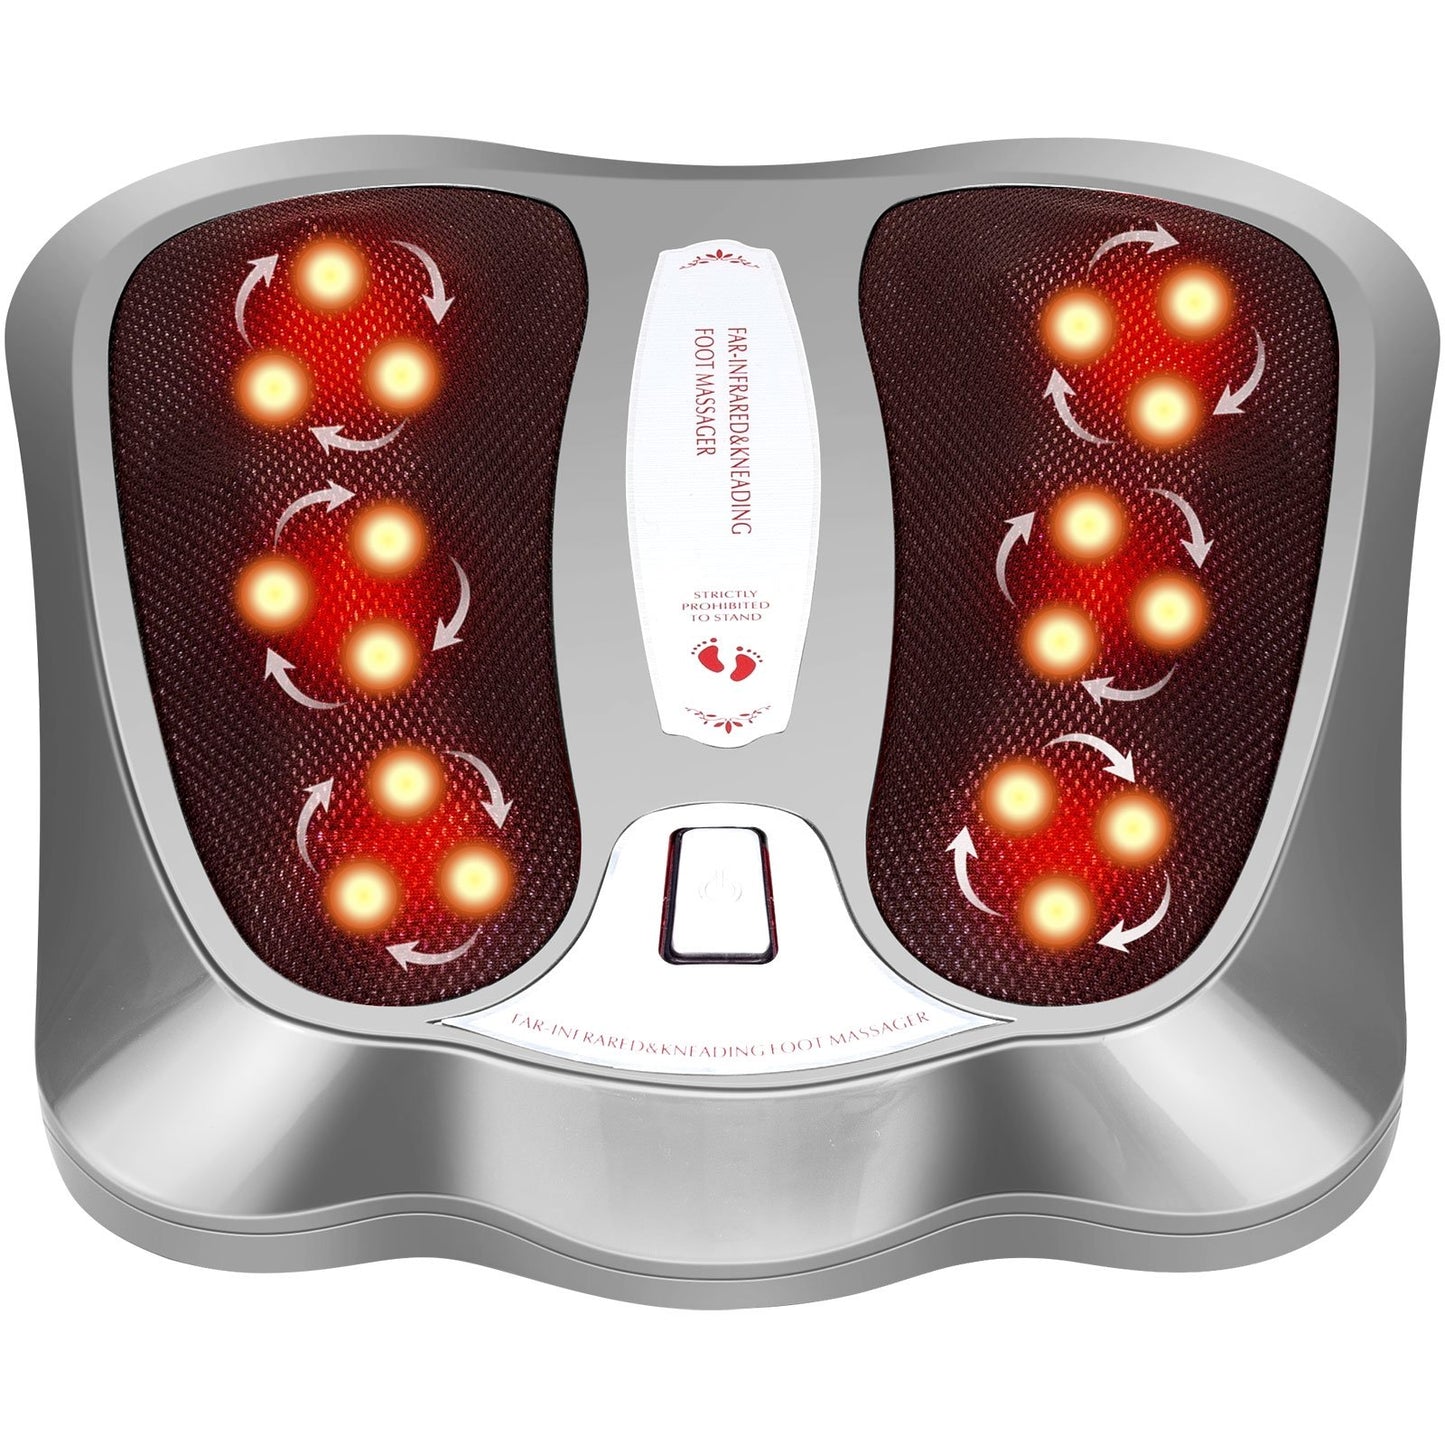 Shiatsu Heated Electric Kneading Foot and Back Massager, Silver